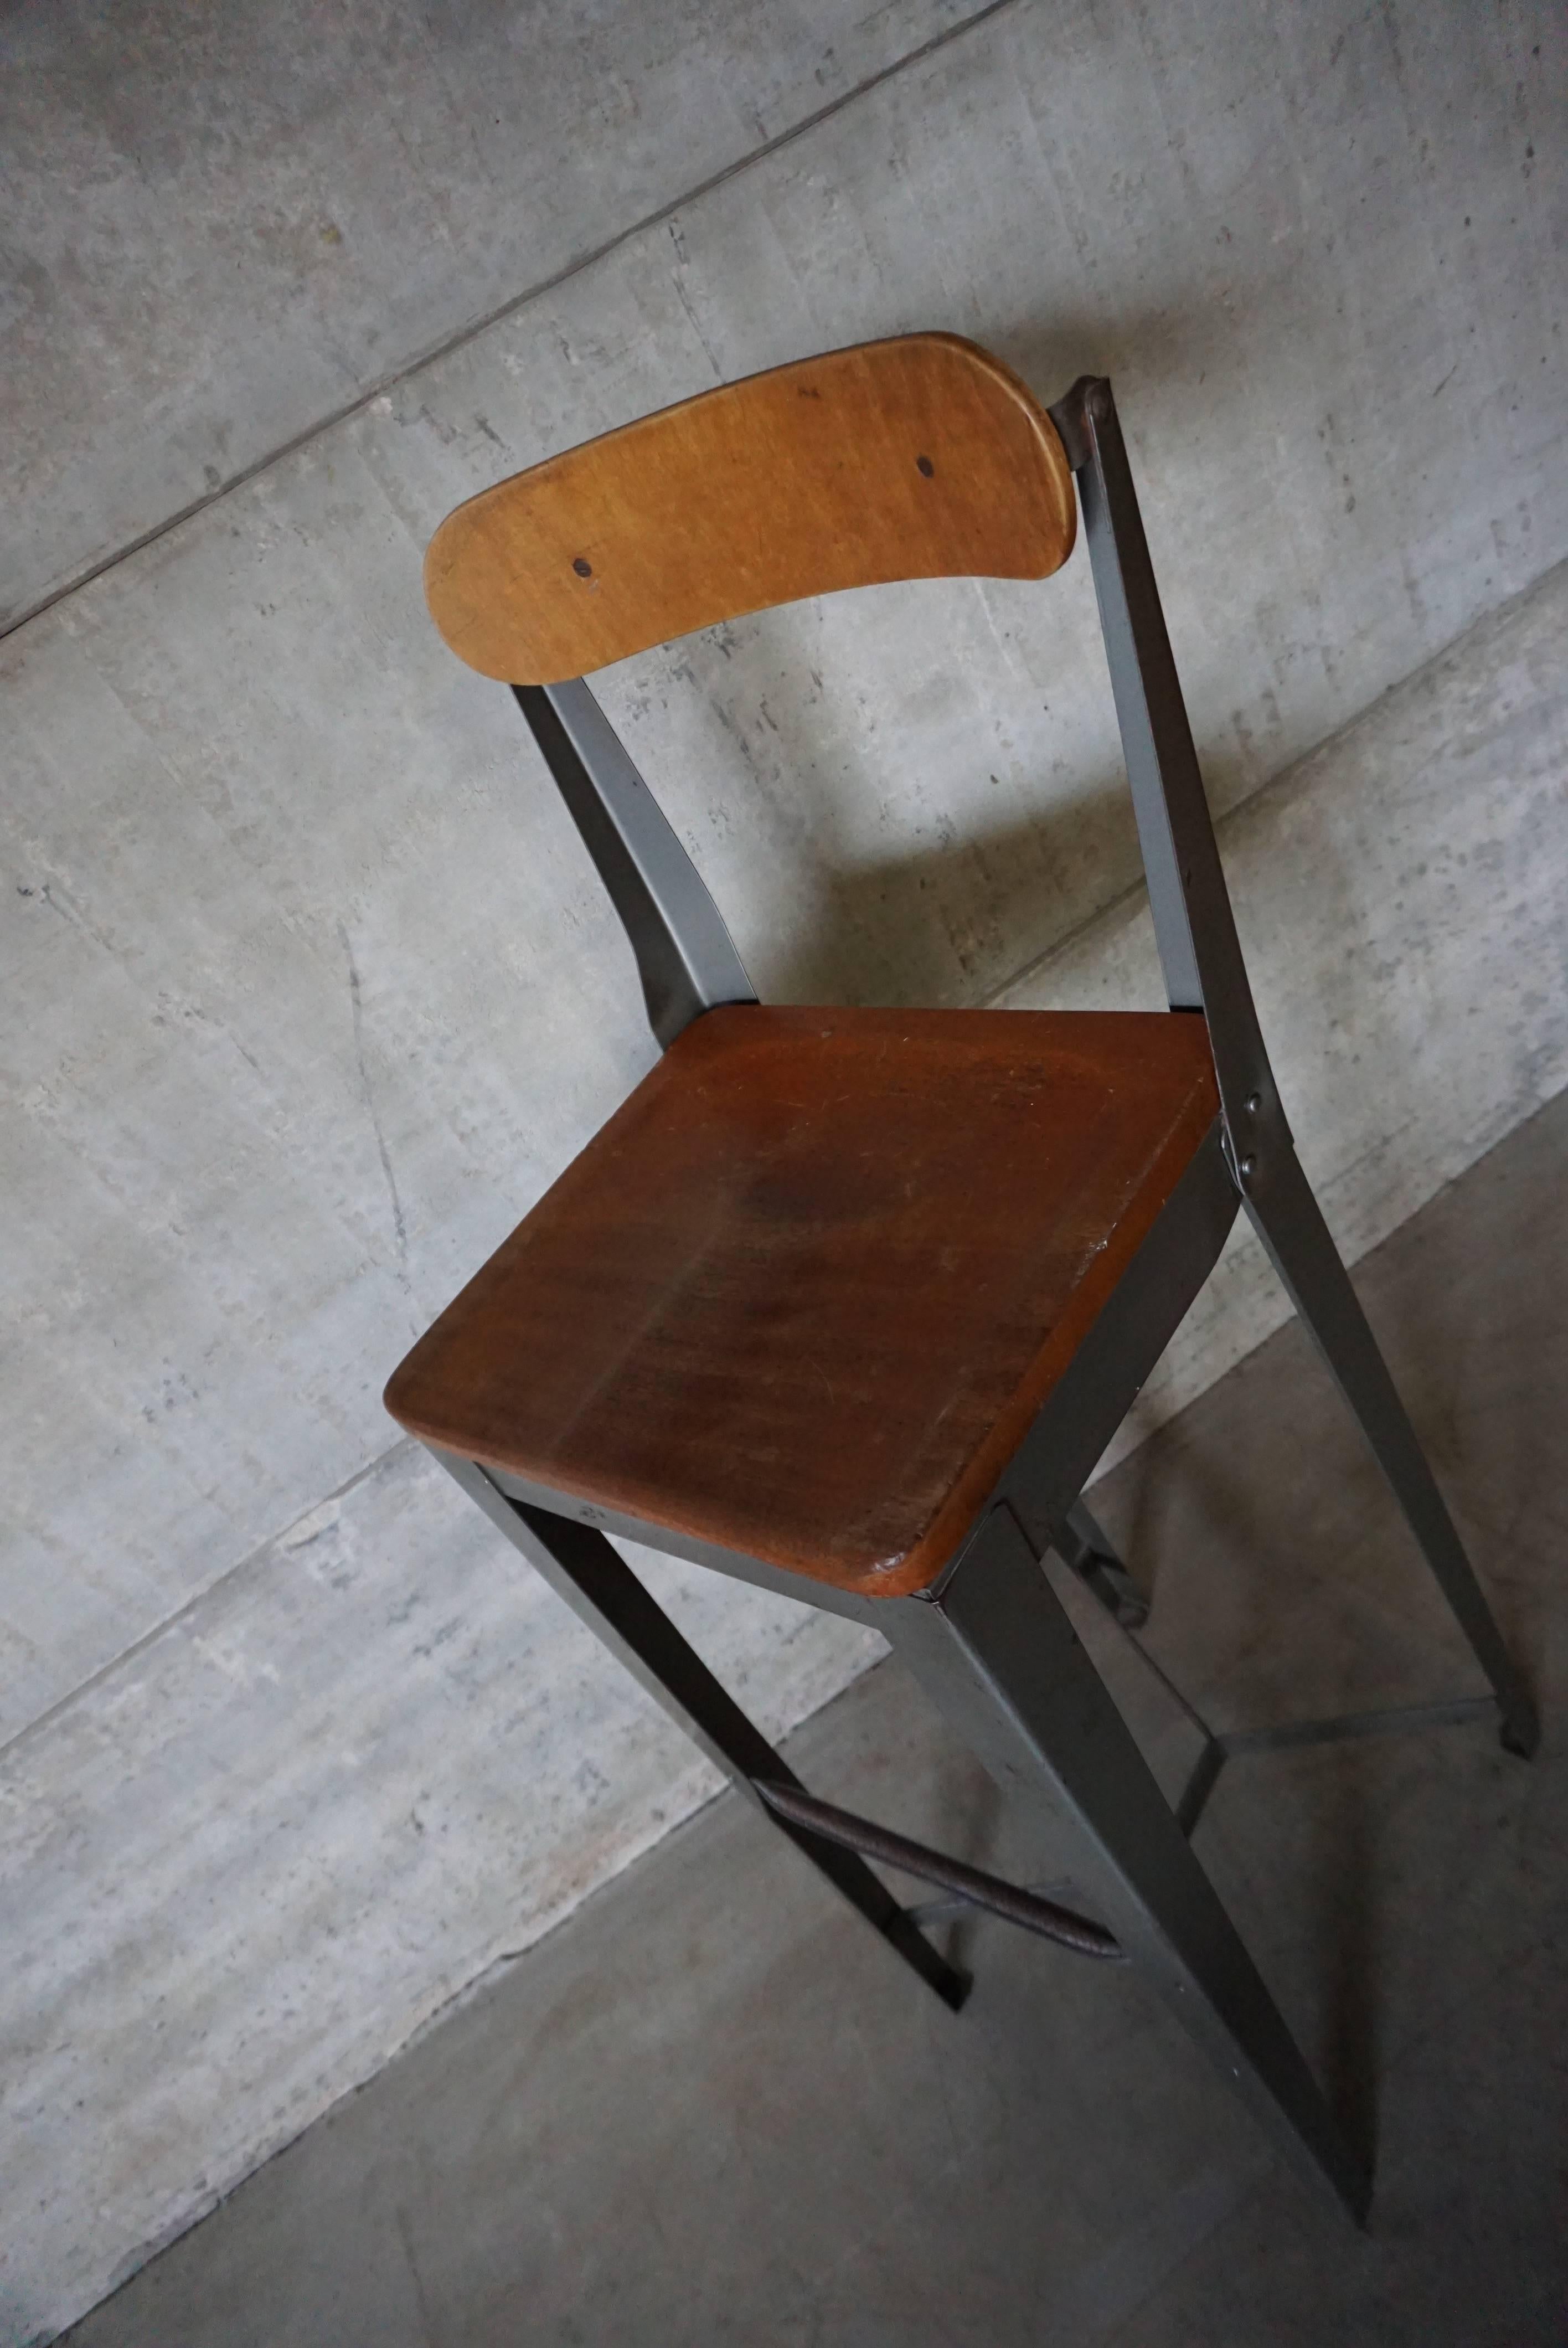 This factory chair was designed and manufactured in England in the 1950s. It features a grey metal frame with wooden seat and backrest. It is in good vintage condition with signs of use. 